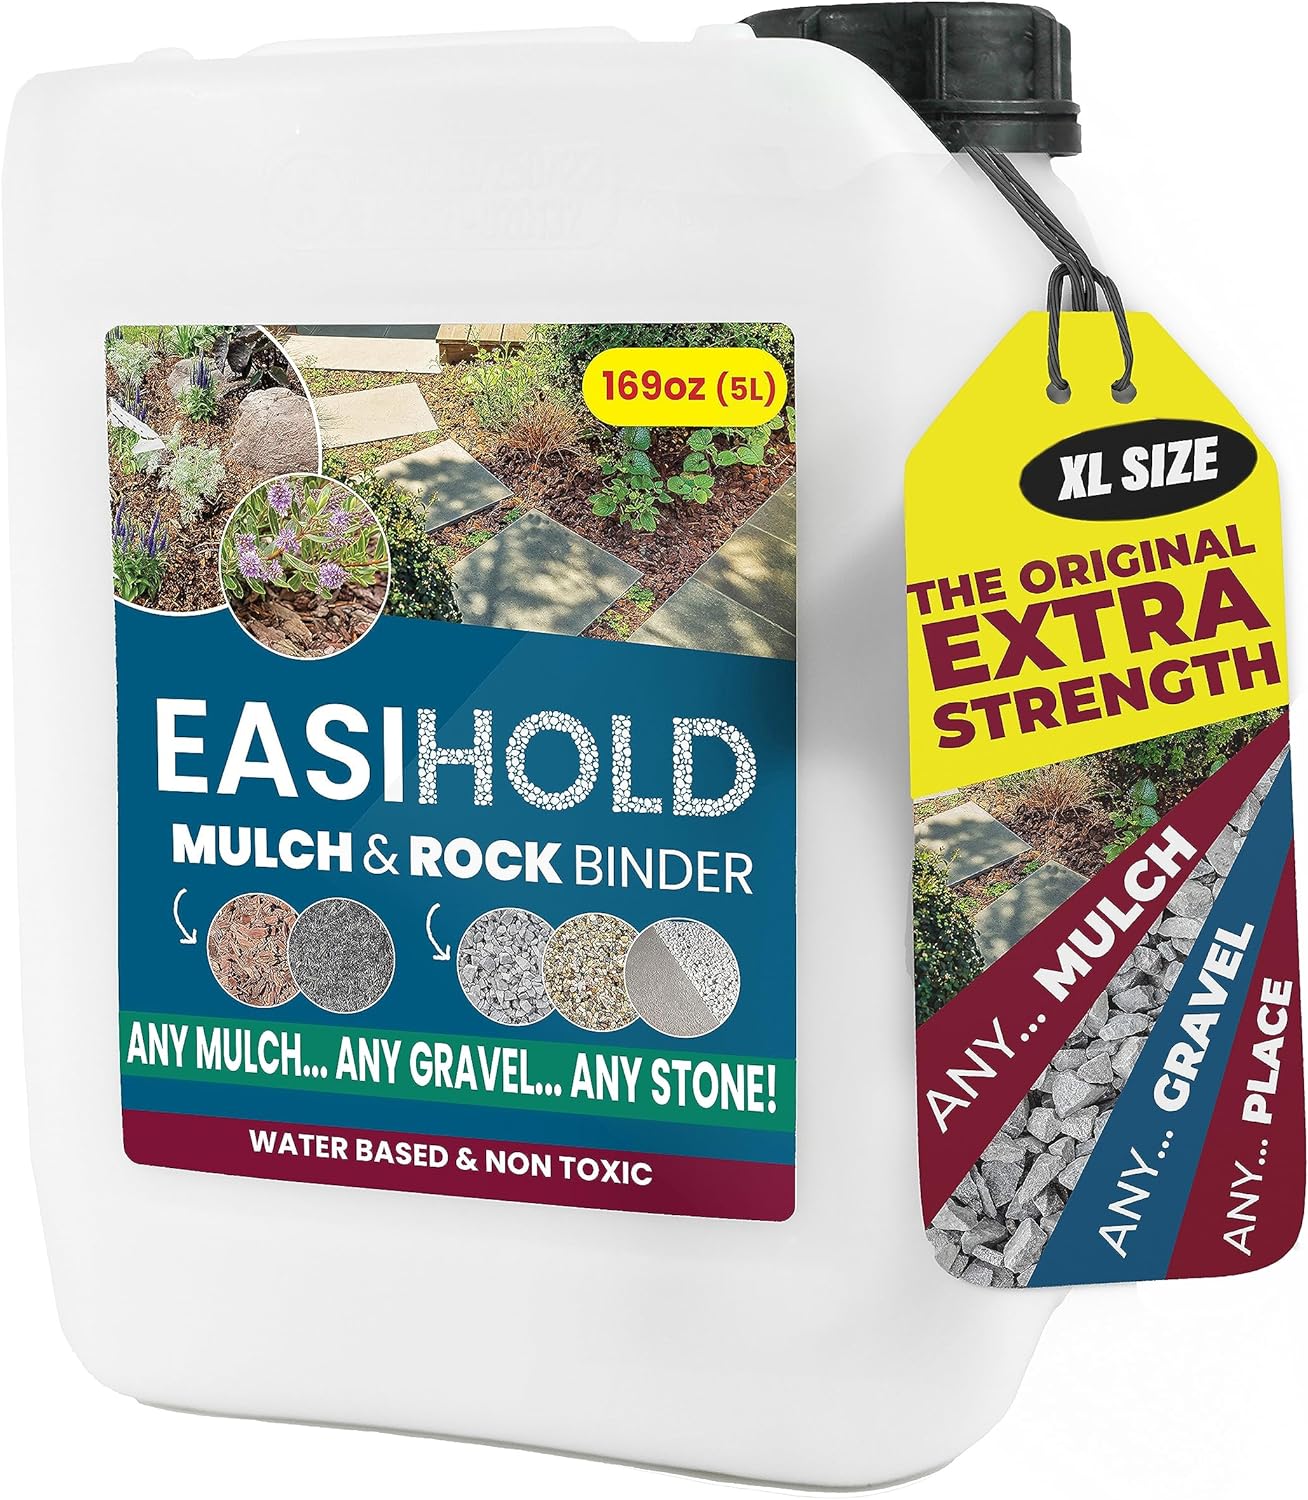 EASIHOLD Rocks - 5 litres/1.3 Gal Gravel Glue for Pea Gravel, Rock Glue and Mulch Glue in XL Saver Size. Lasts up to 3 Years, Non Toxic, Ready to Use, Fast Drying.